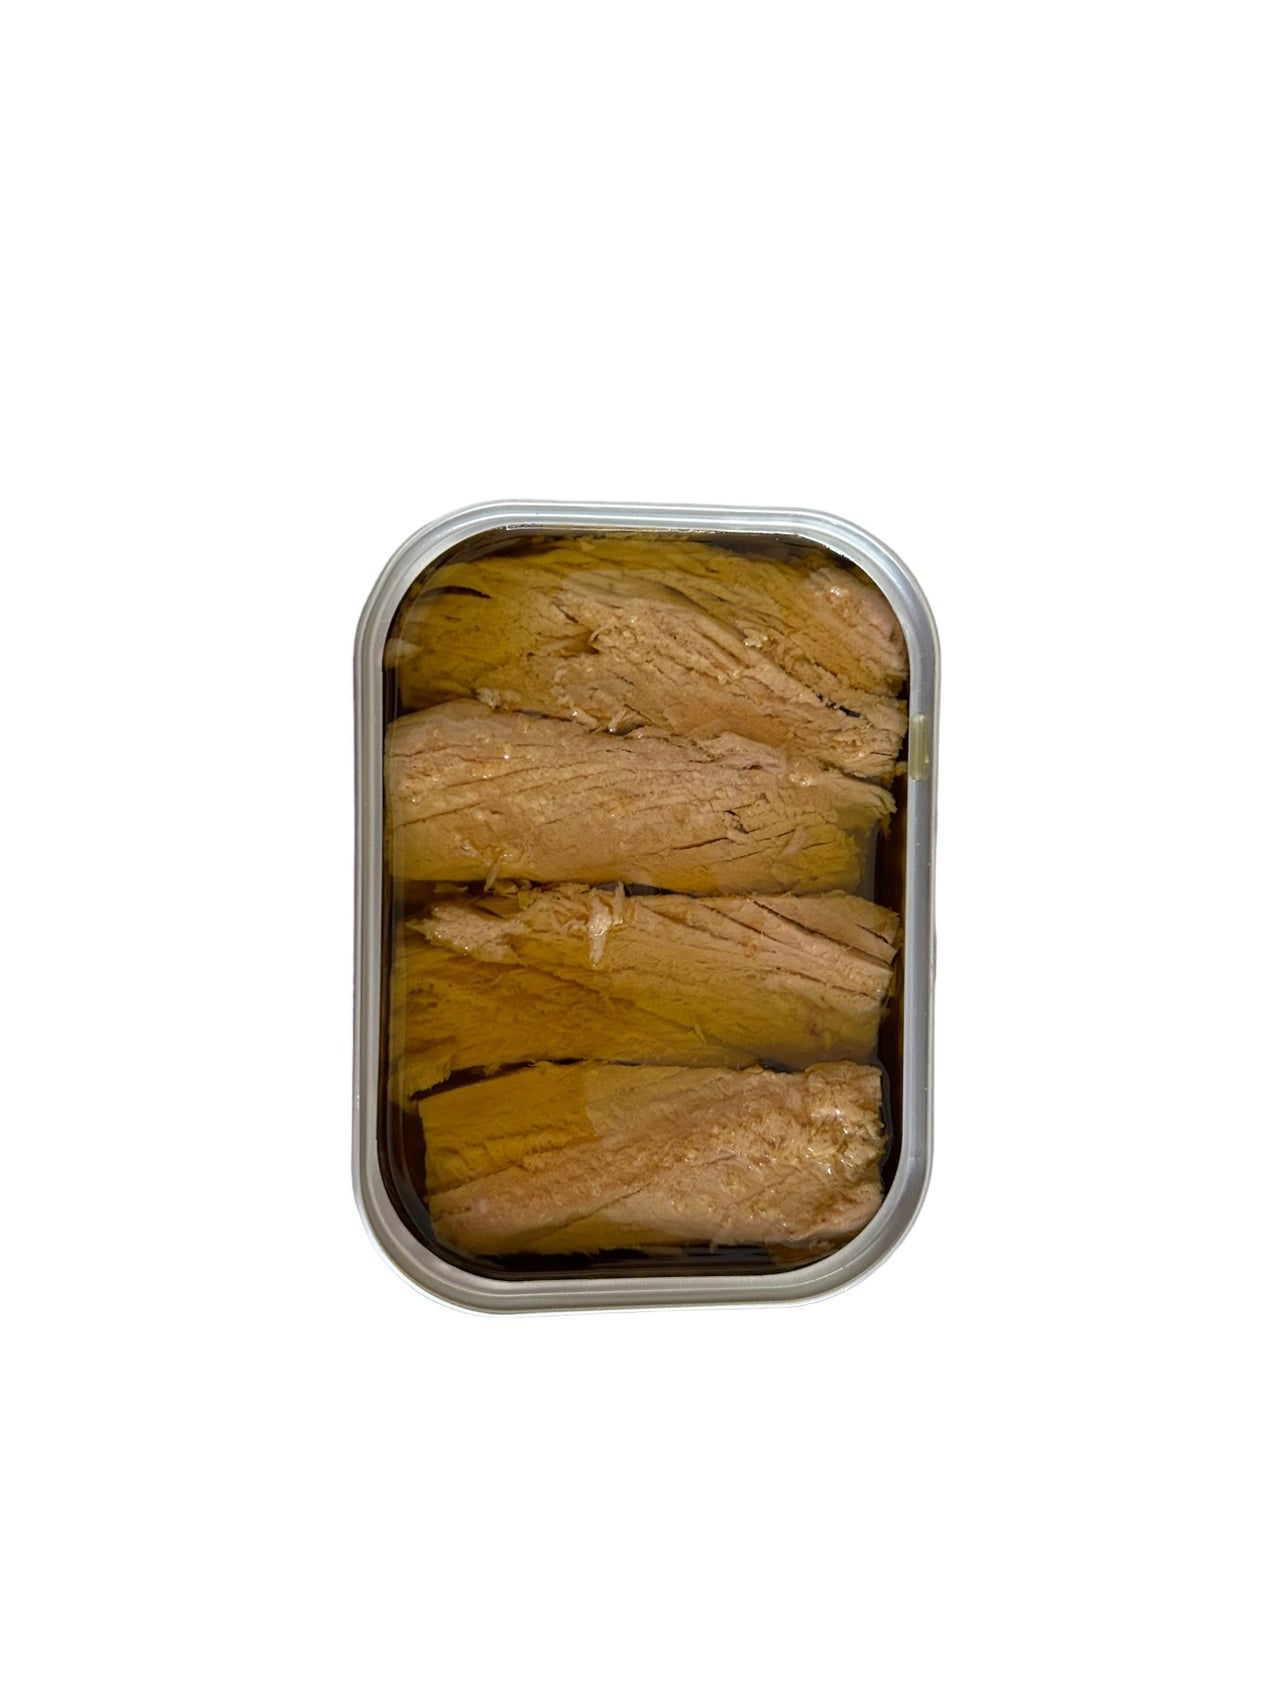 PORTHOS Smoked Tuna Fillets in Olive Oil - 3 Pack